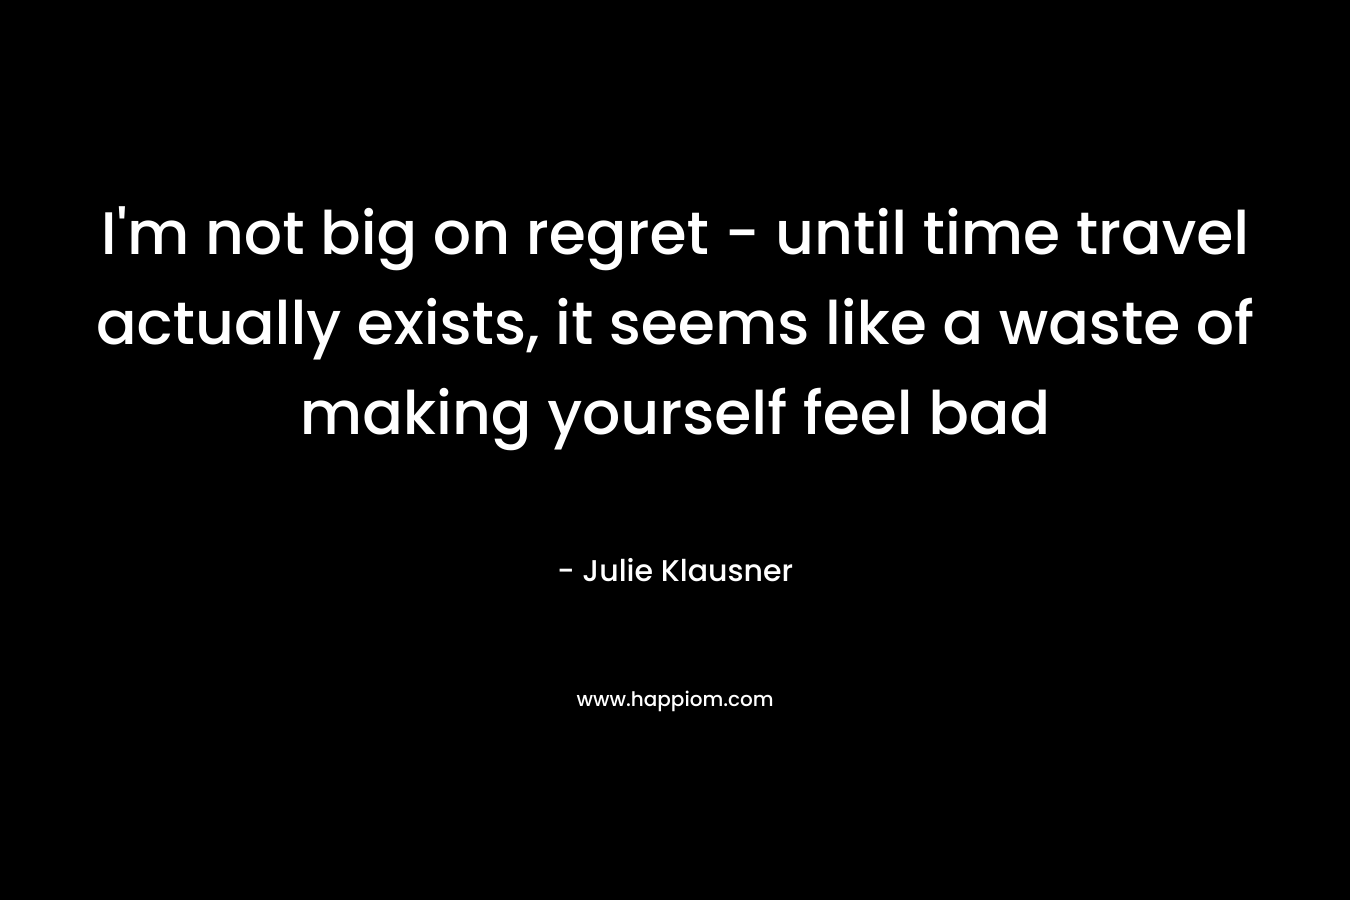 I'm not big on regret - until time travel actually exists, it seems like a waste of making yourself feel bad